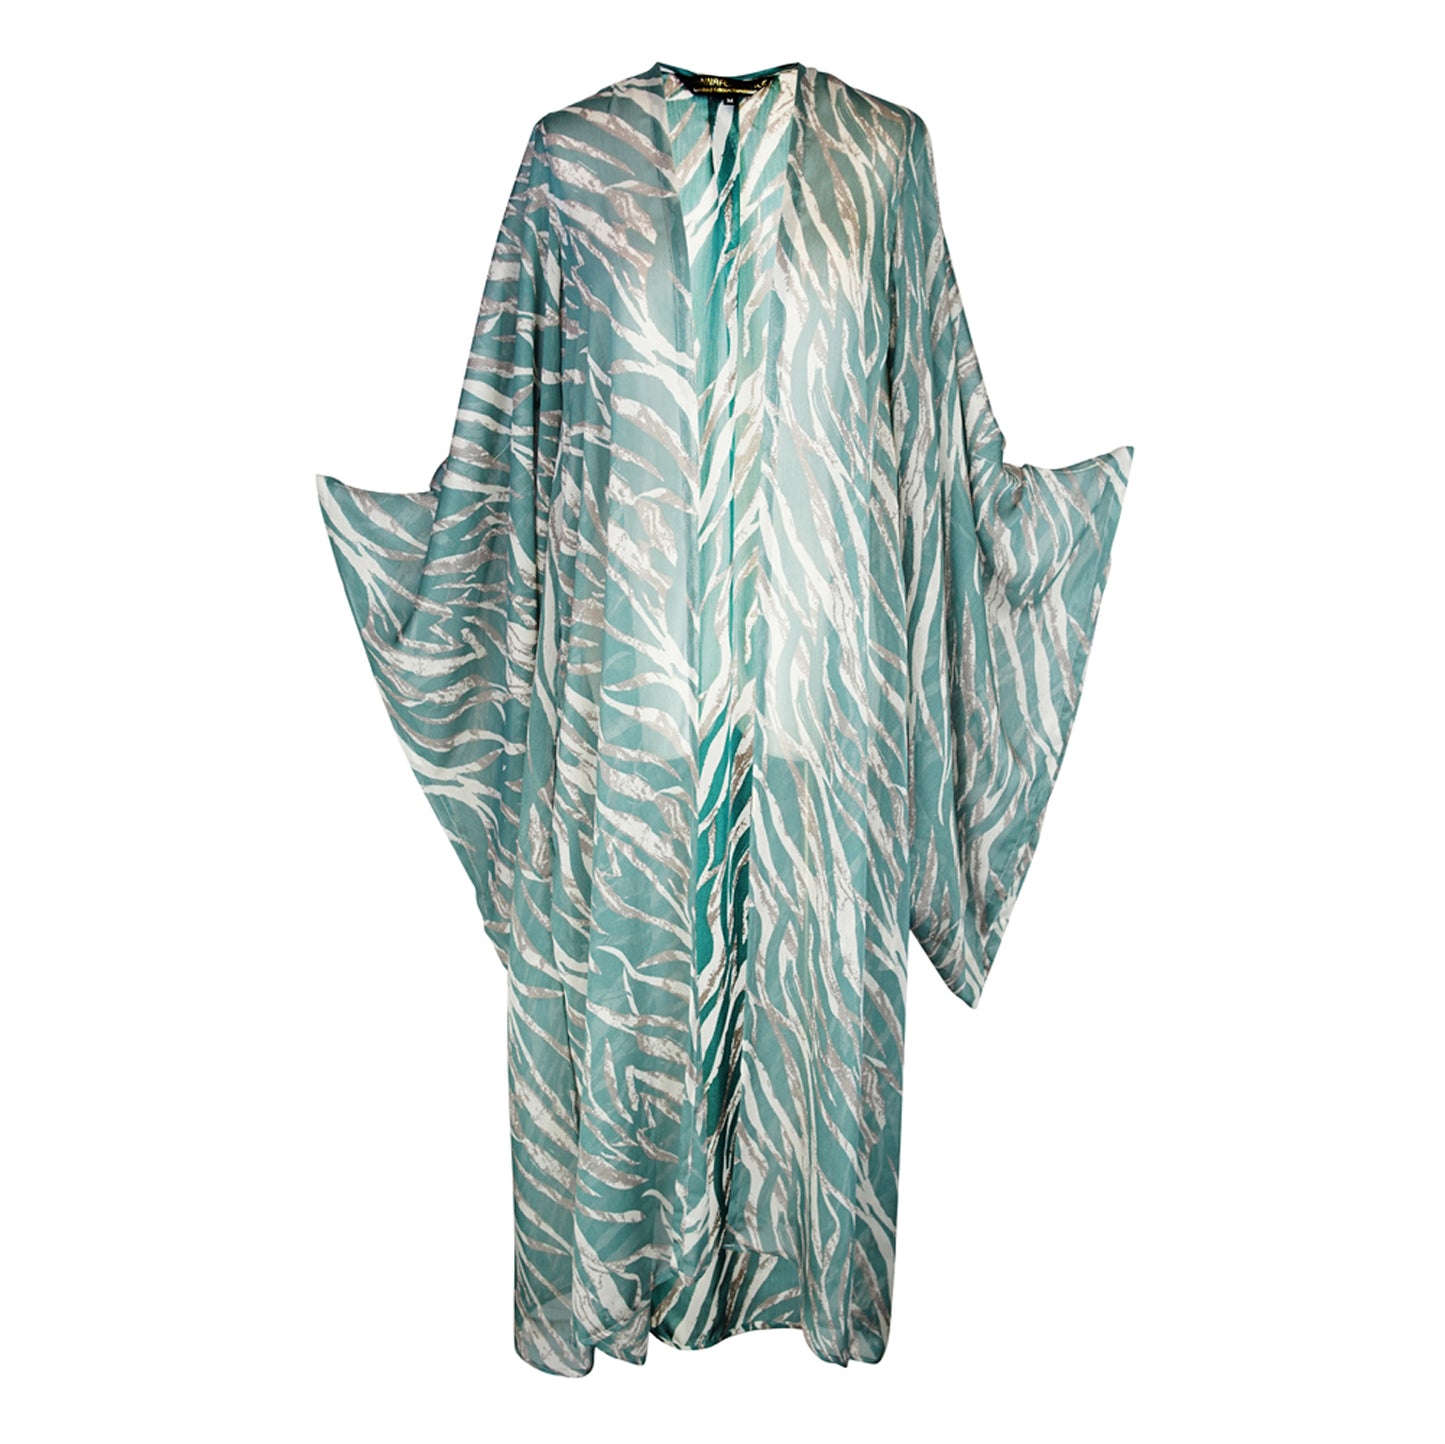 Seafoam zebra print kimono with belt. Can be worn open as a robe or wrap dress. Long flowy sleeves with ankle hem. Made from rayon fabric.